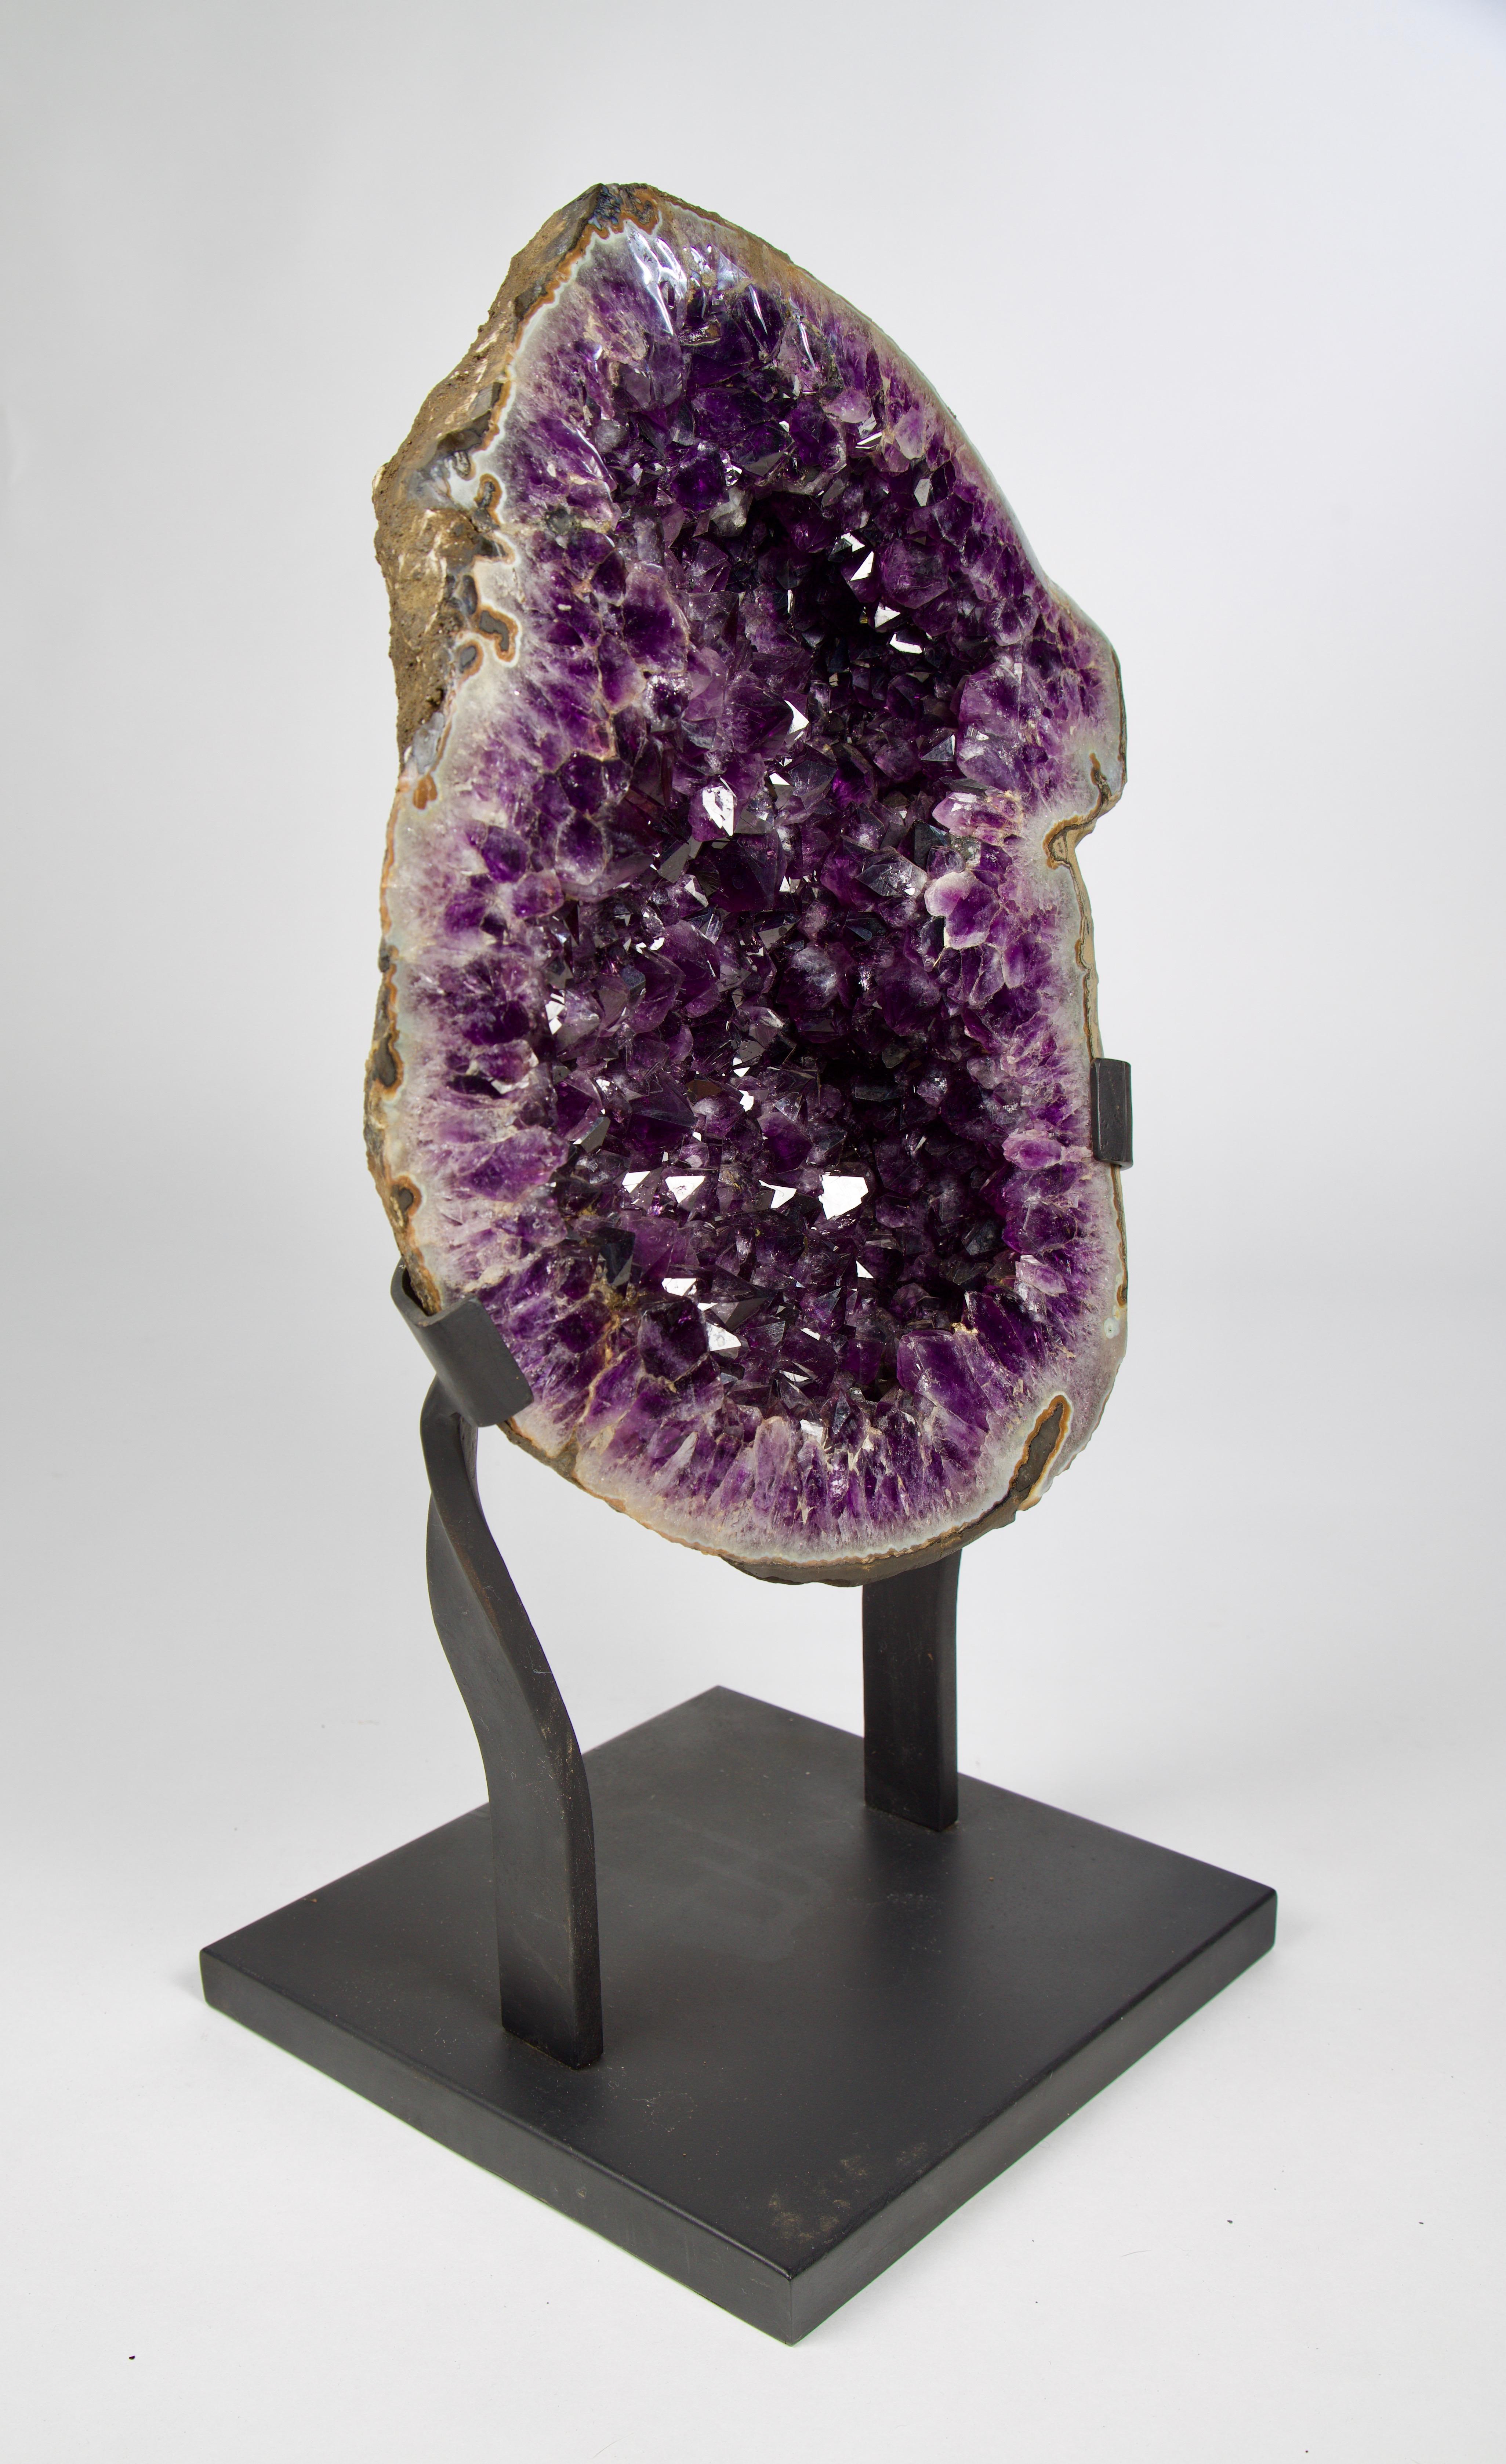 how to buy amethyst from uruguay